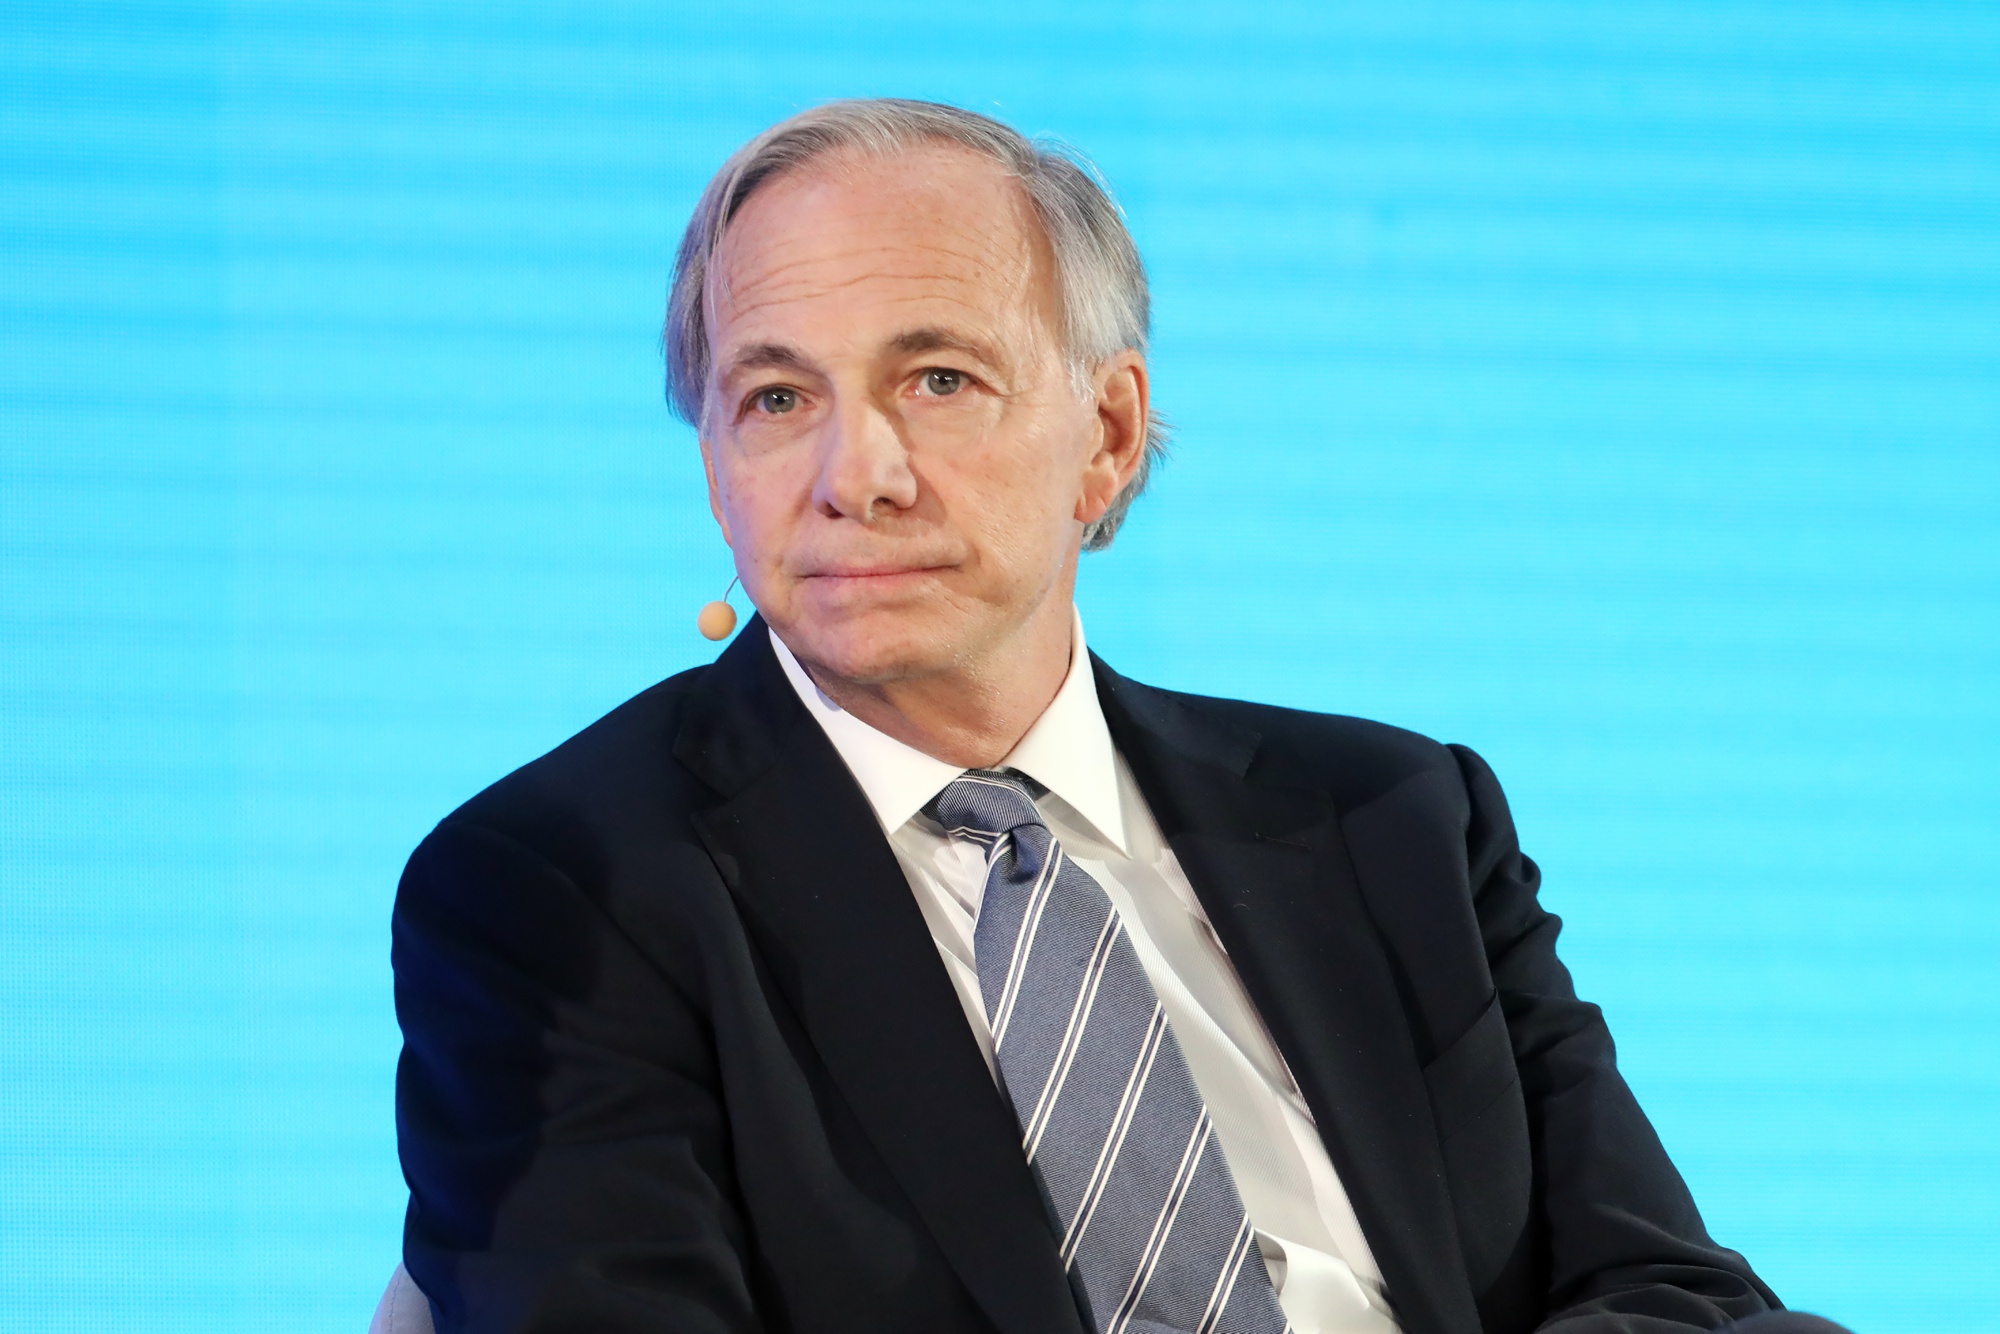 Ray Dalio Says He Doesn't Want to Hold Bonds, Cash 'Is Good' - Bloomberg